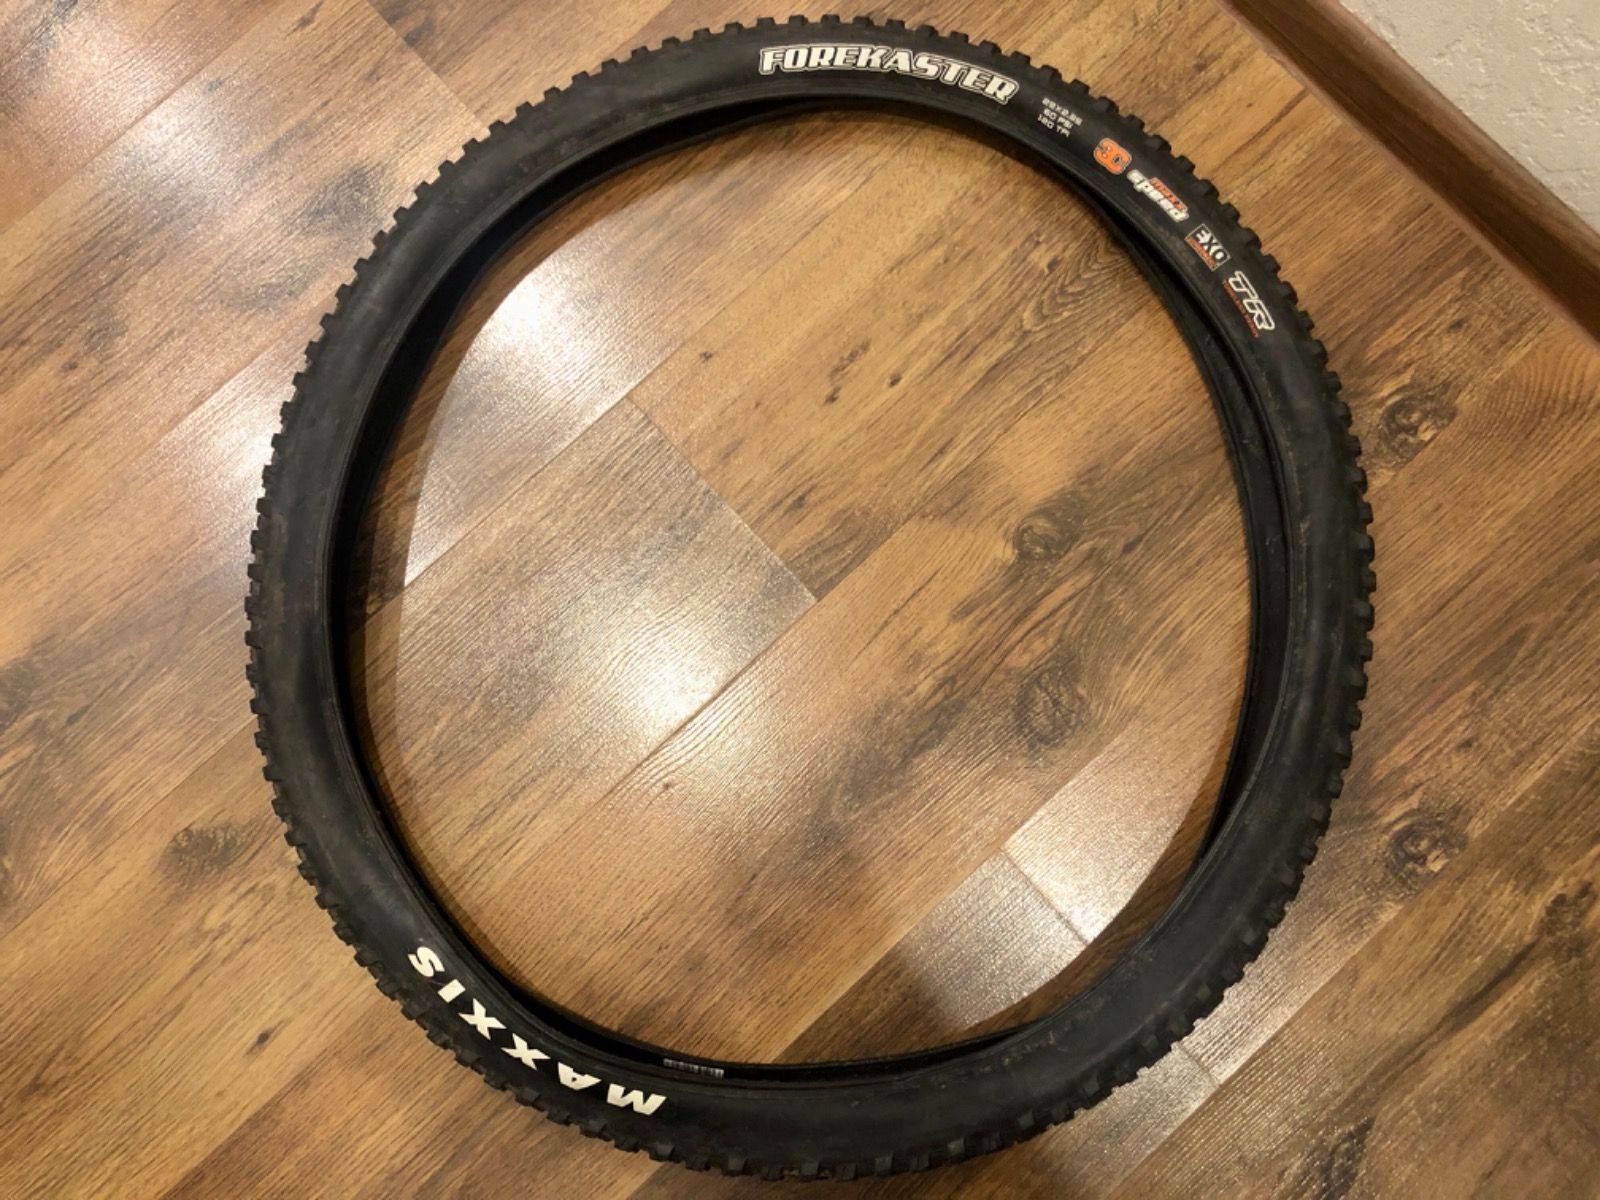 Покрышки Maxxis 29” Minion DHF + Forekaster как новые